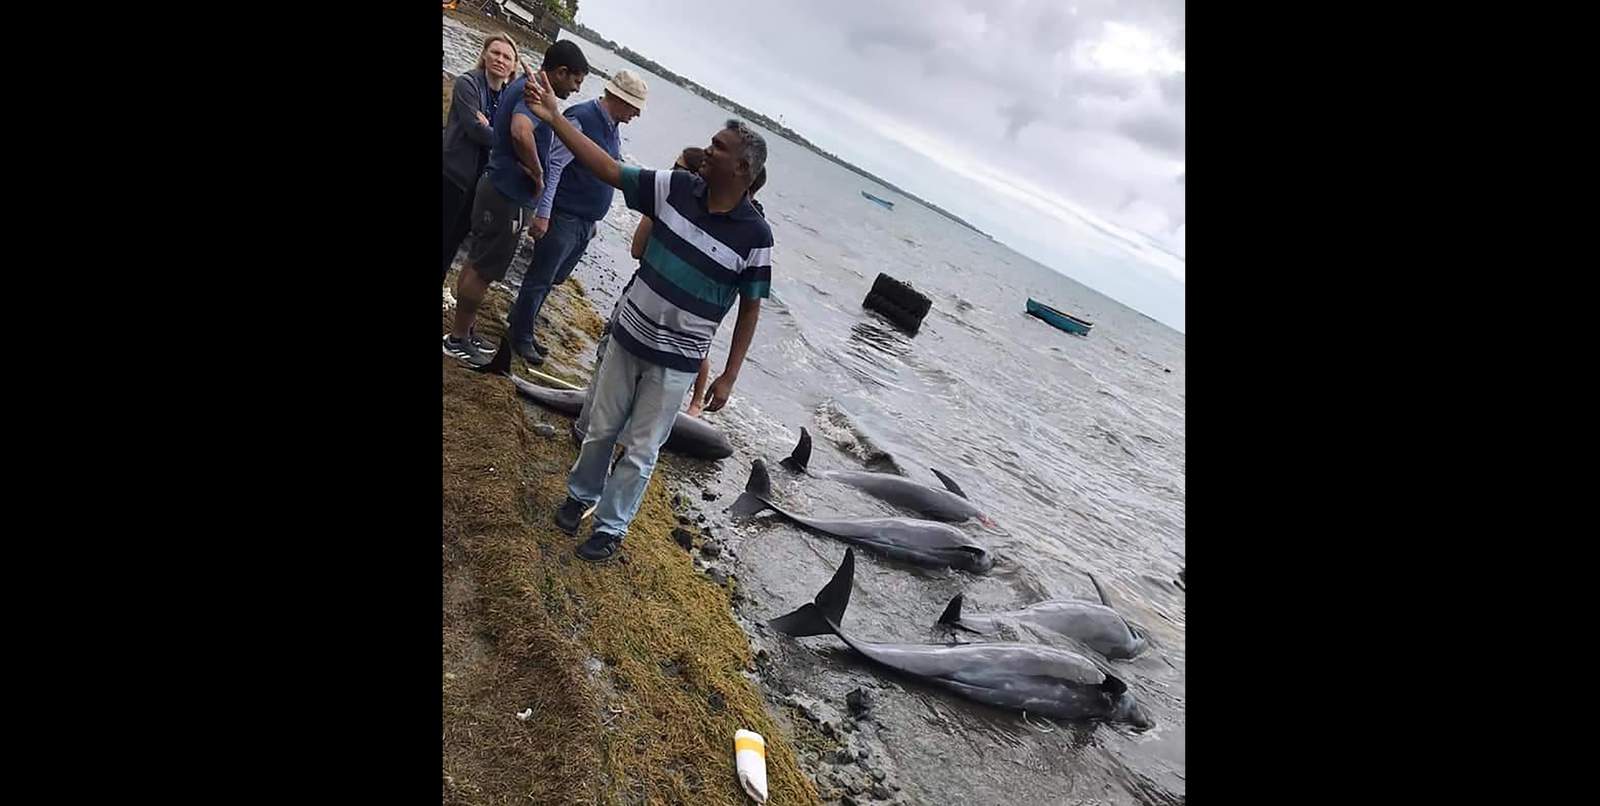 14 dolphins die in Mauritius near Japanese ship's oil spill